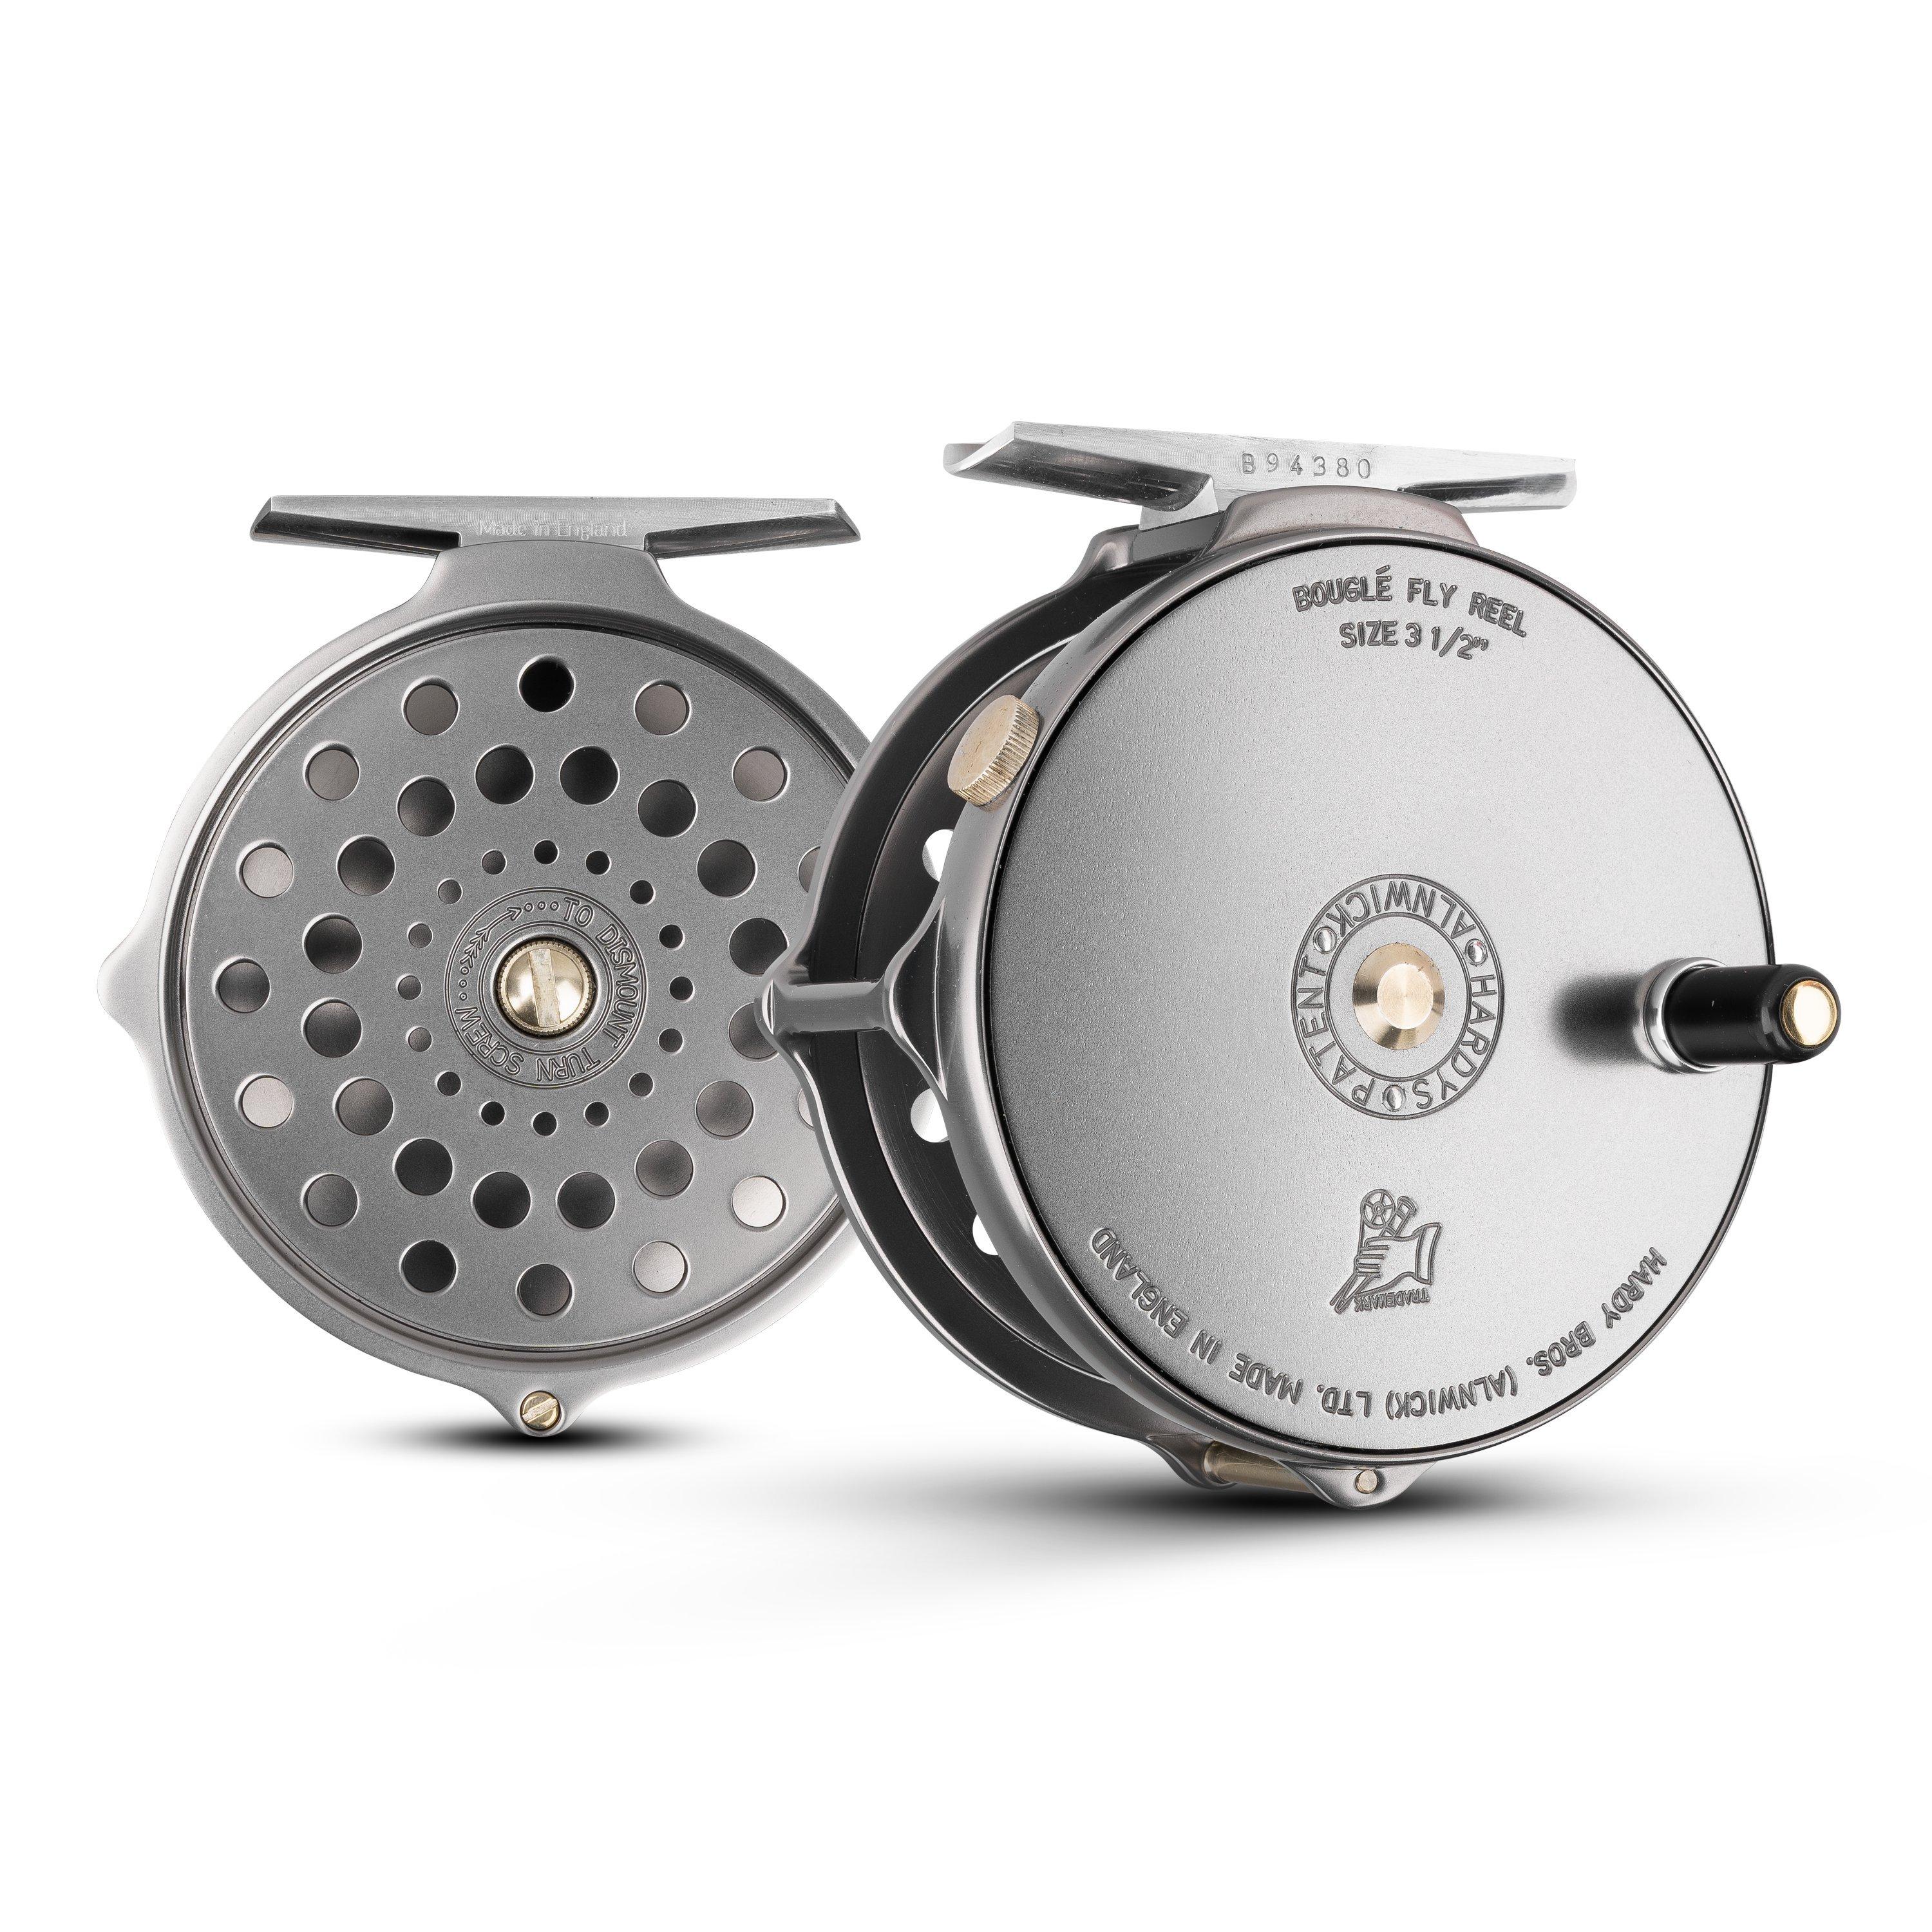 Hardy Bouglé Fly Fishing Reel Product Details